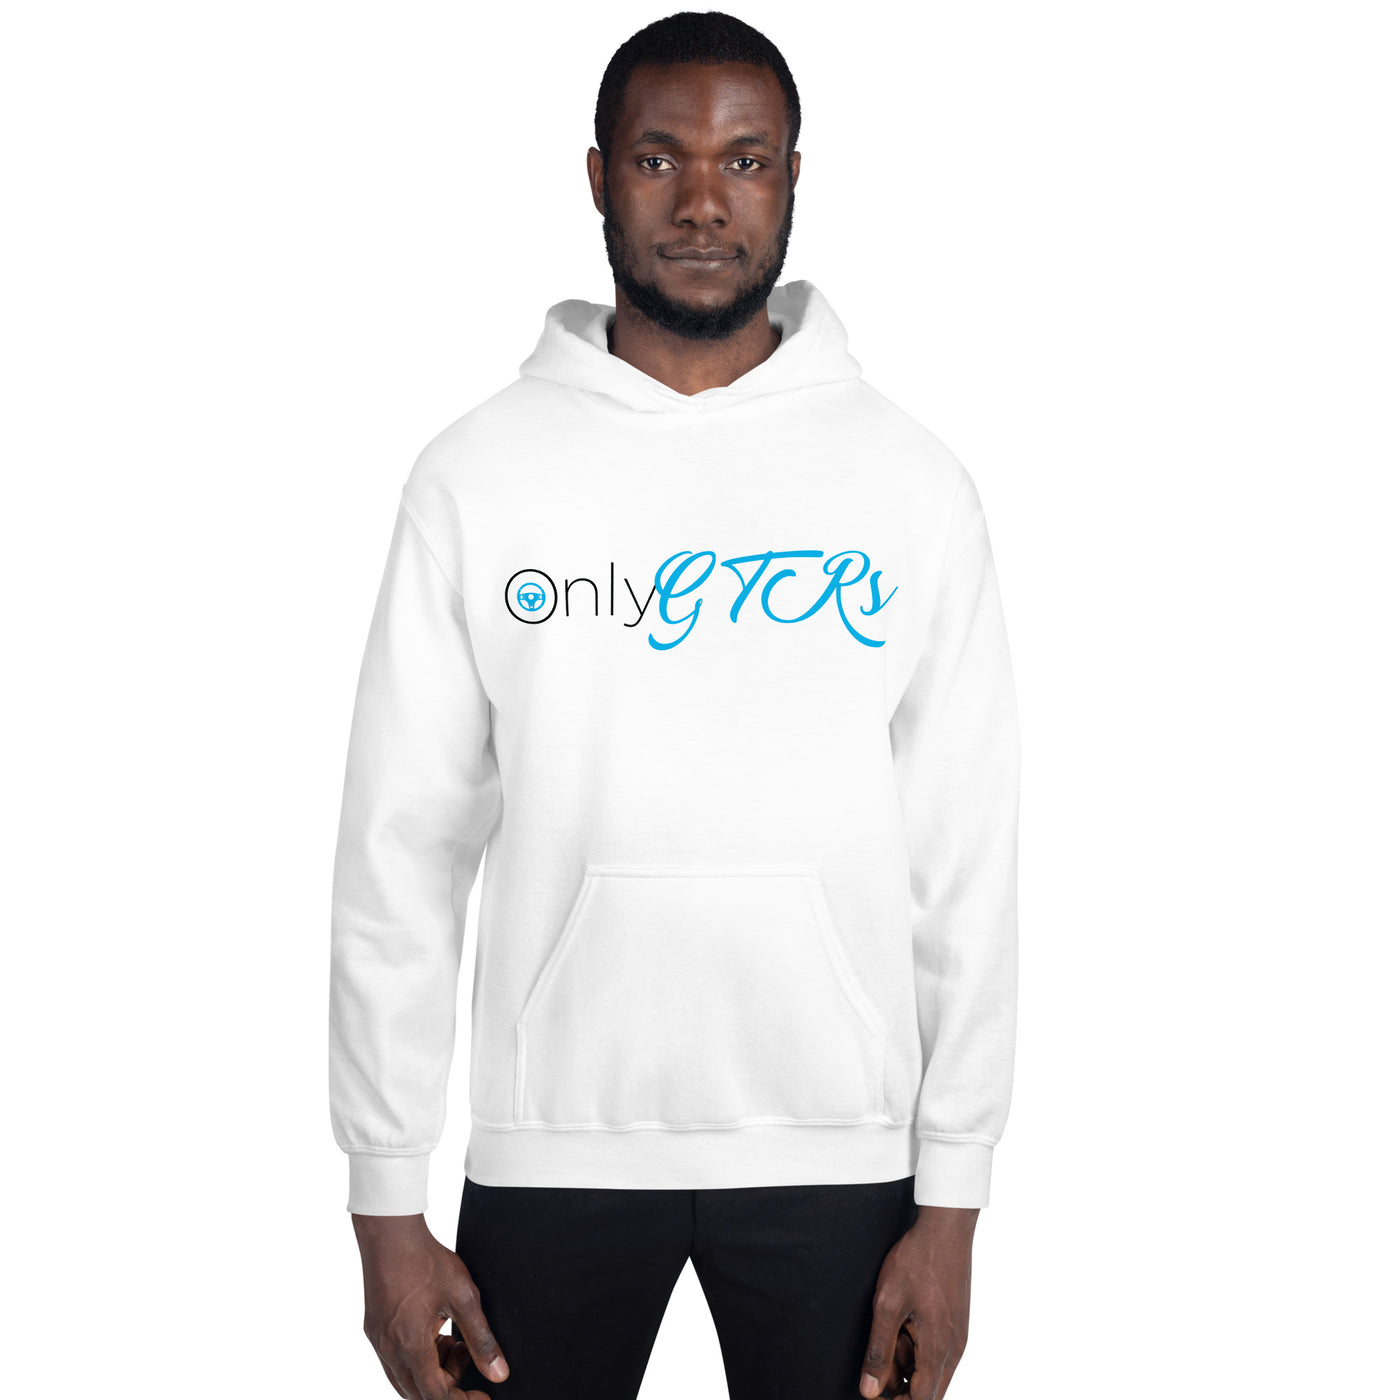 Only GTRs Hoodie (White)